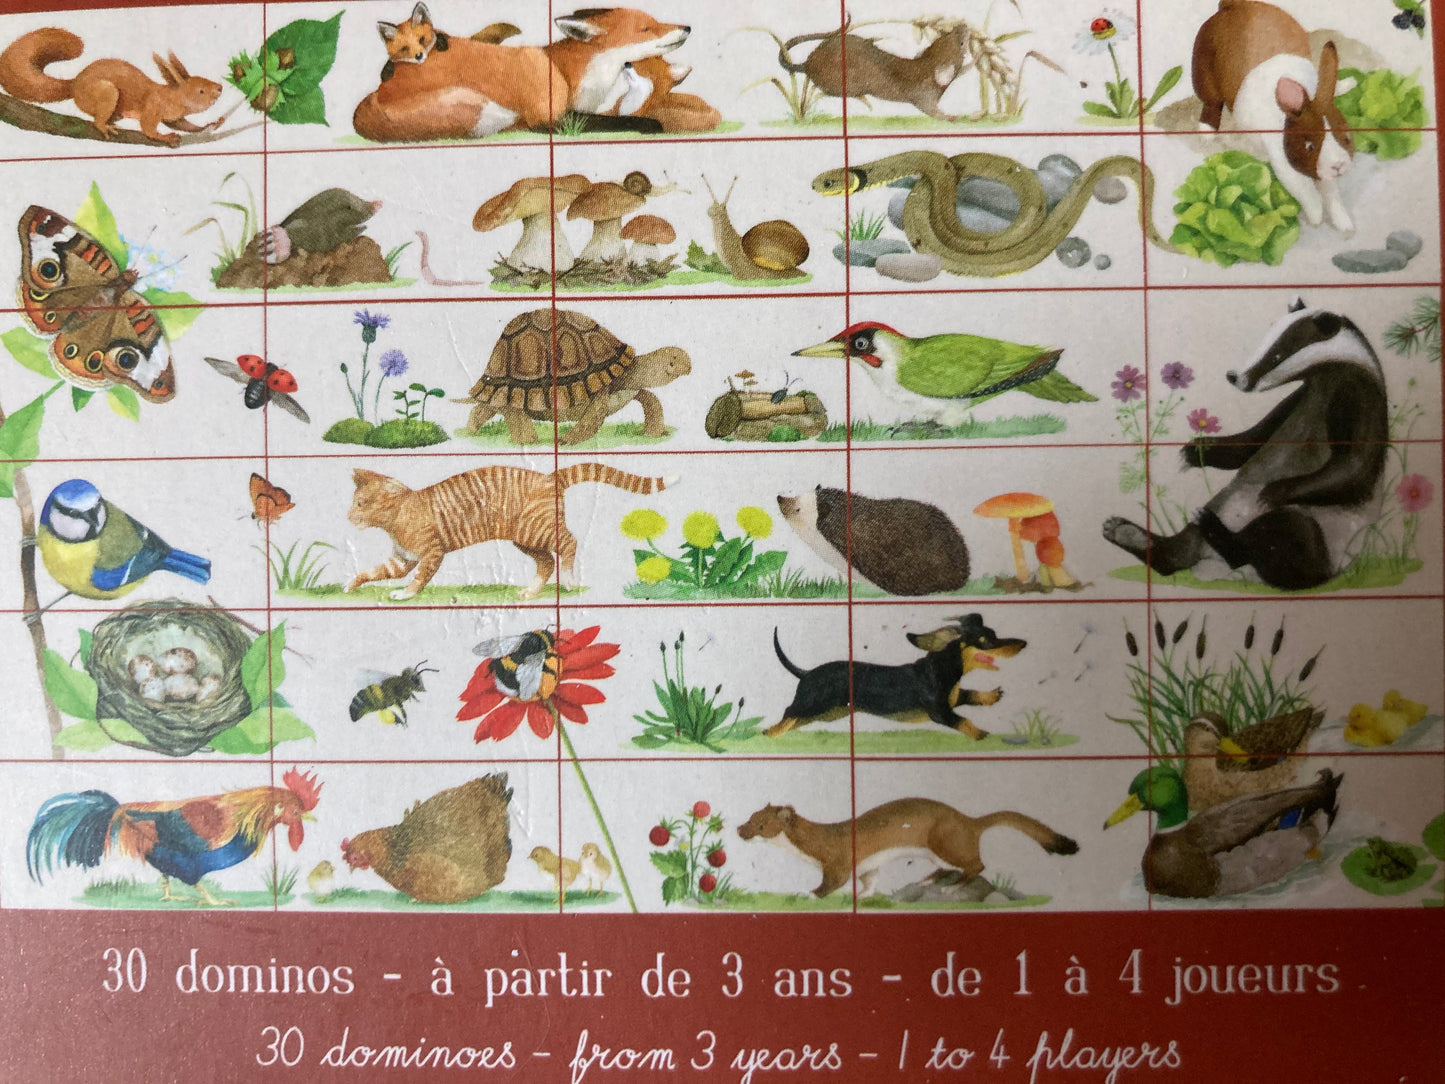 Educational Puzzle Game Set - ANIMAL DOMINOS